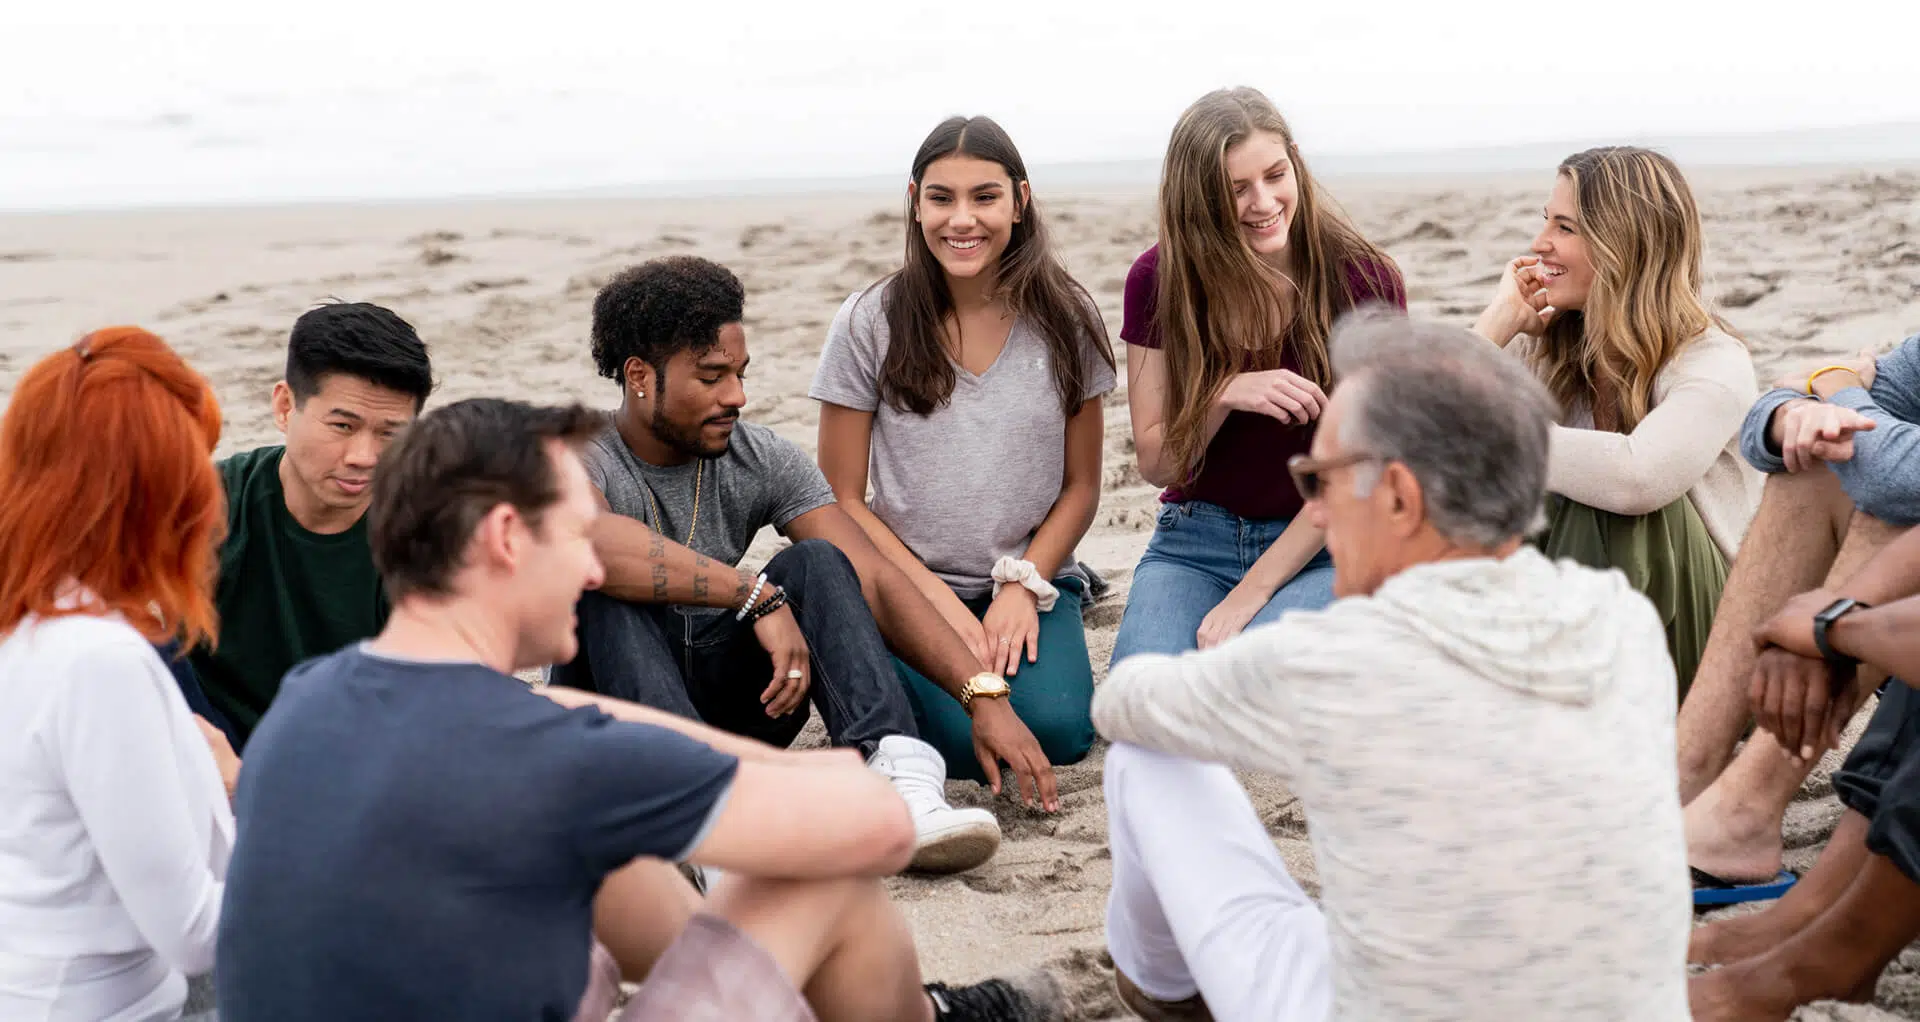 Smiling men and women taking part in a group therapy session on the beach.